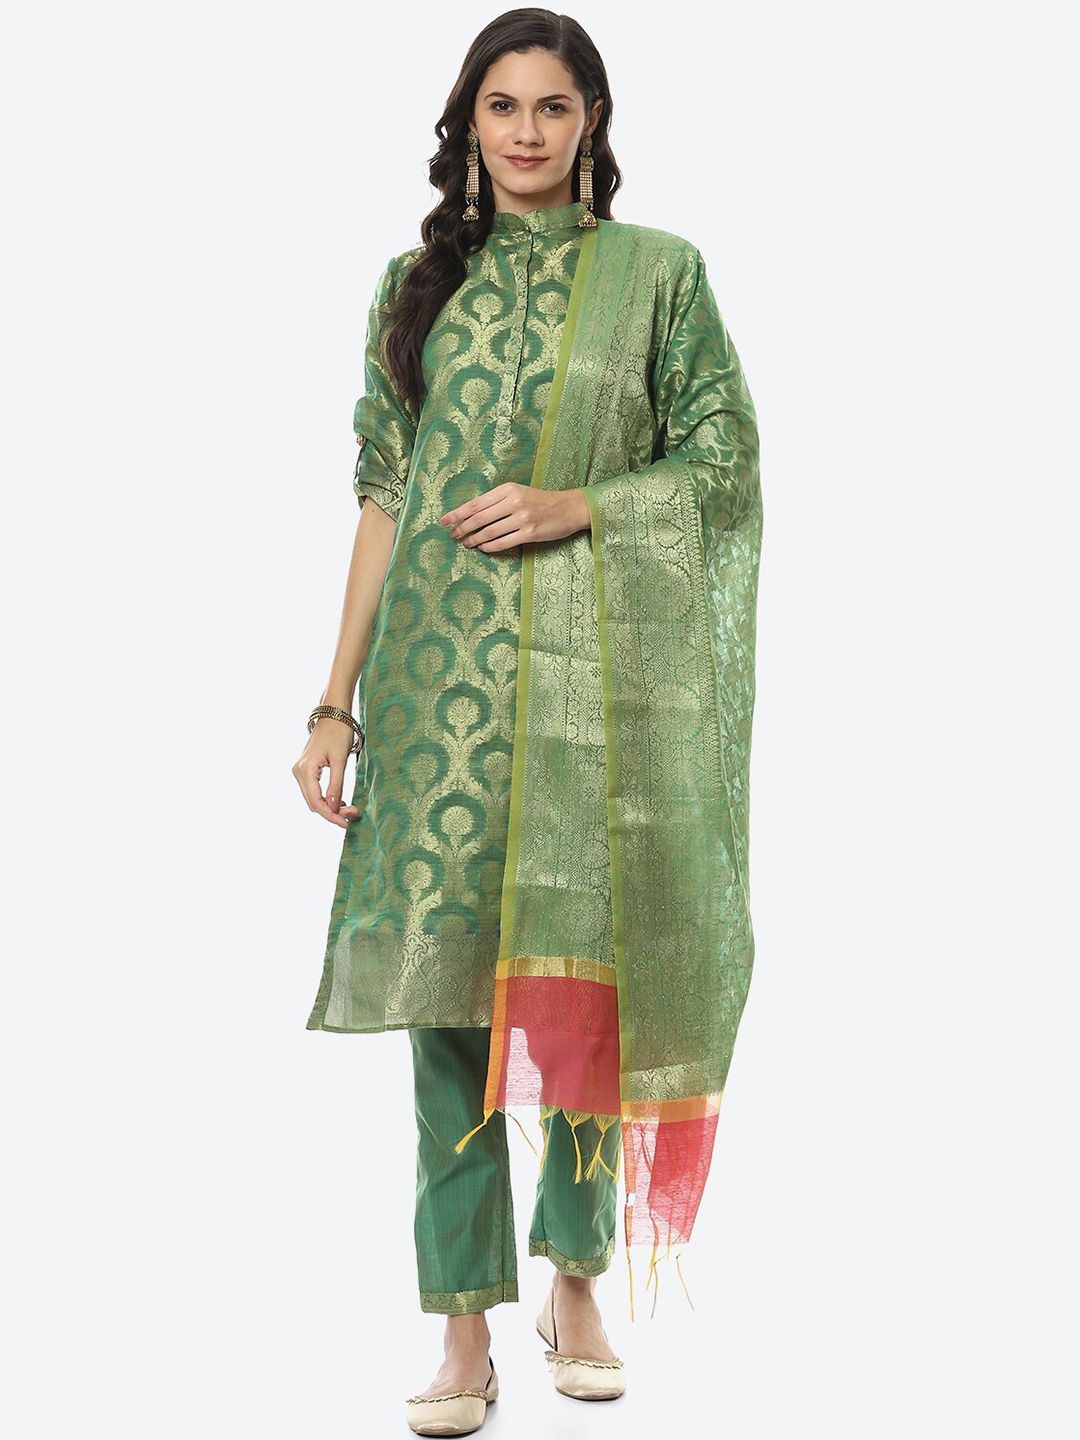 Biba Green & Gold-Toned Unstitched Dress Material Price in India